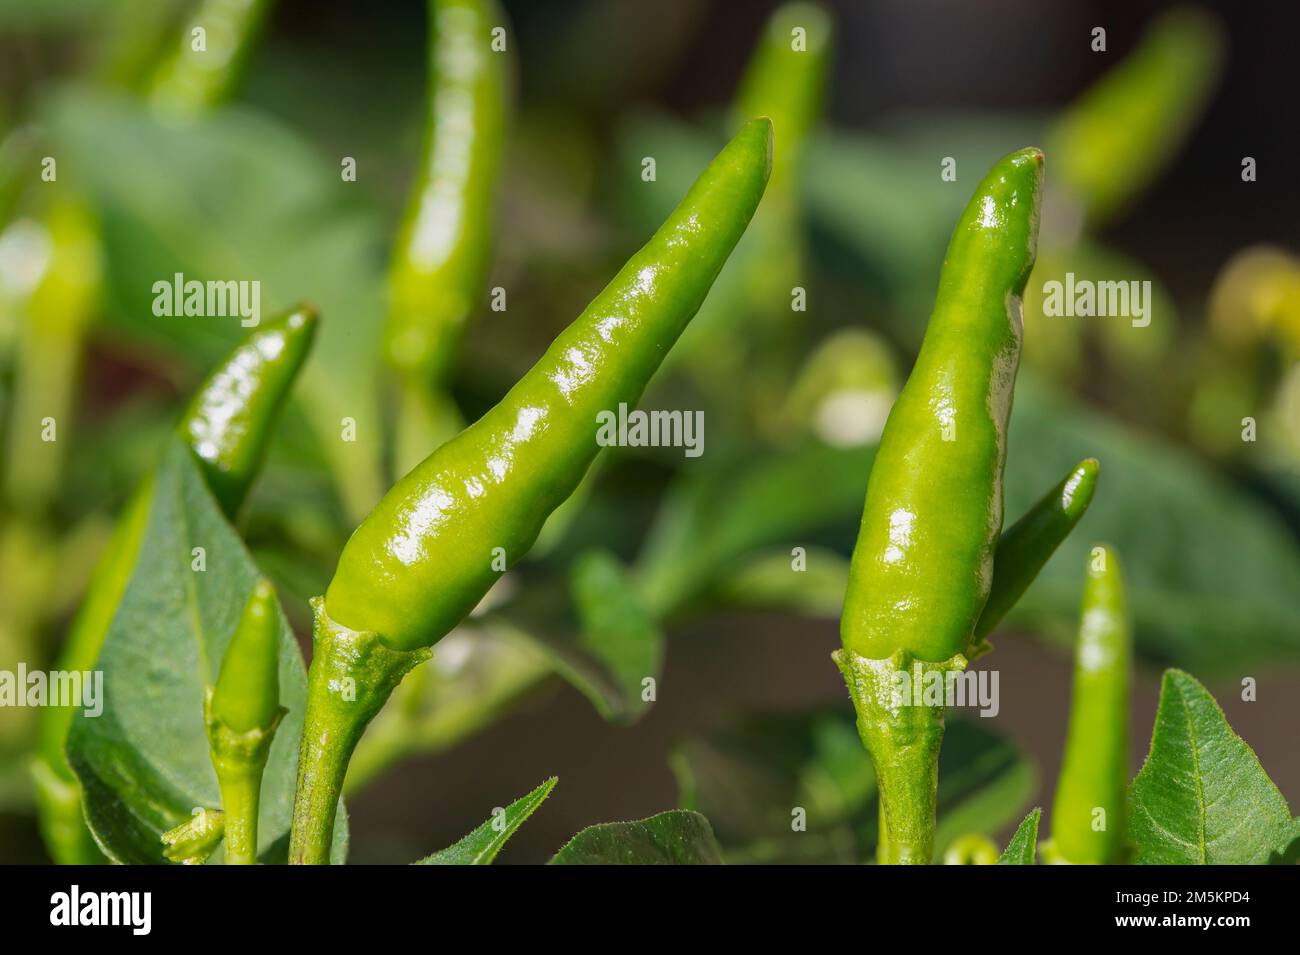 small green chillies also known as Capsicum annuum (chilli peppers) and Capsicum frutescens growing on tree. Stock Photo